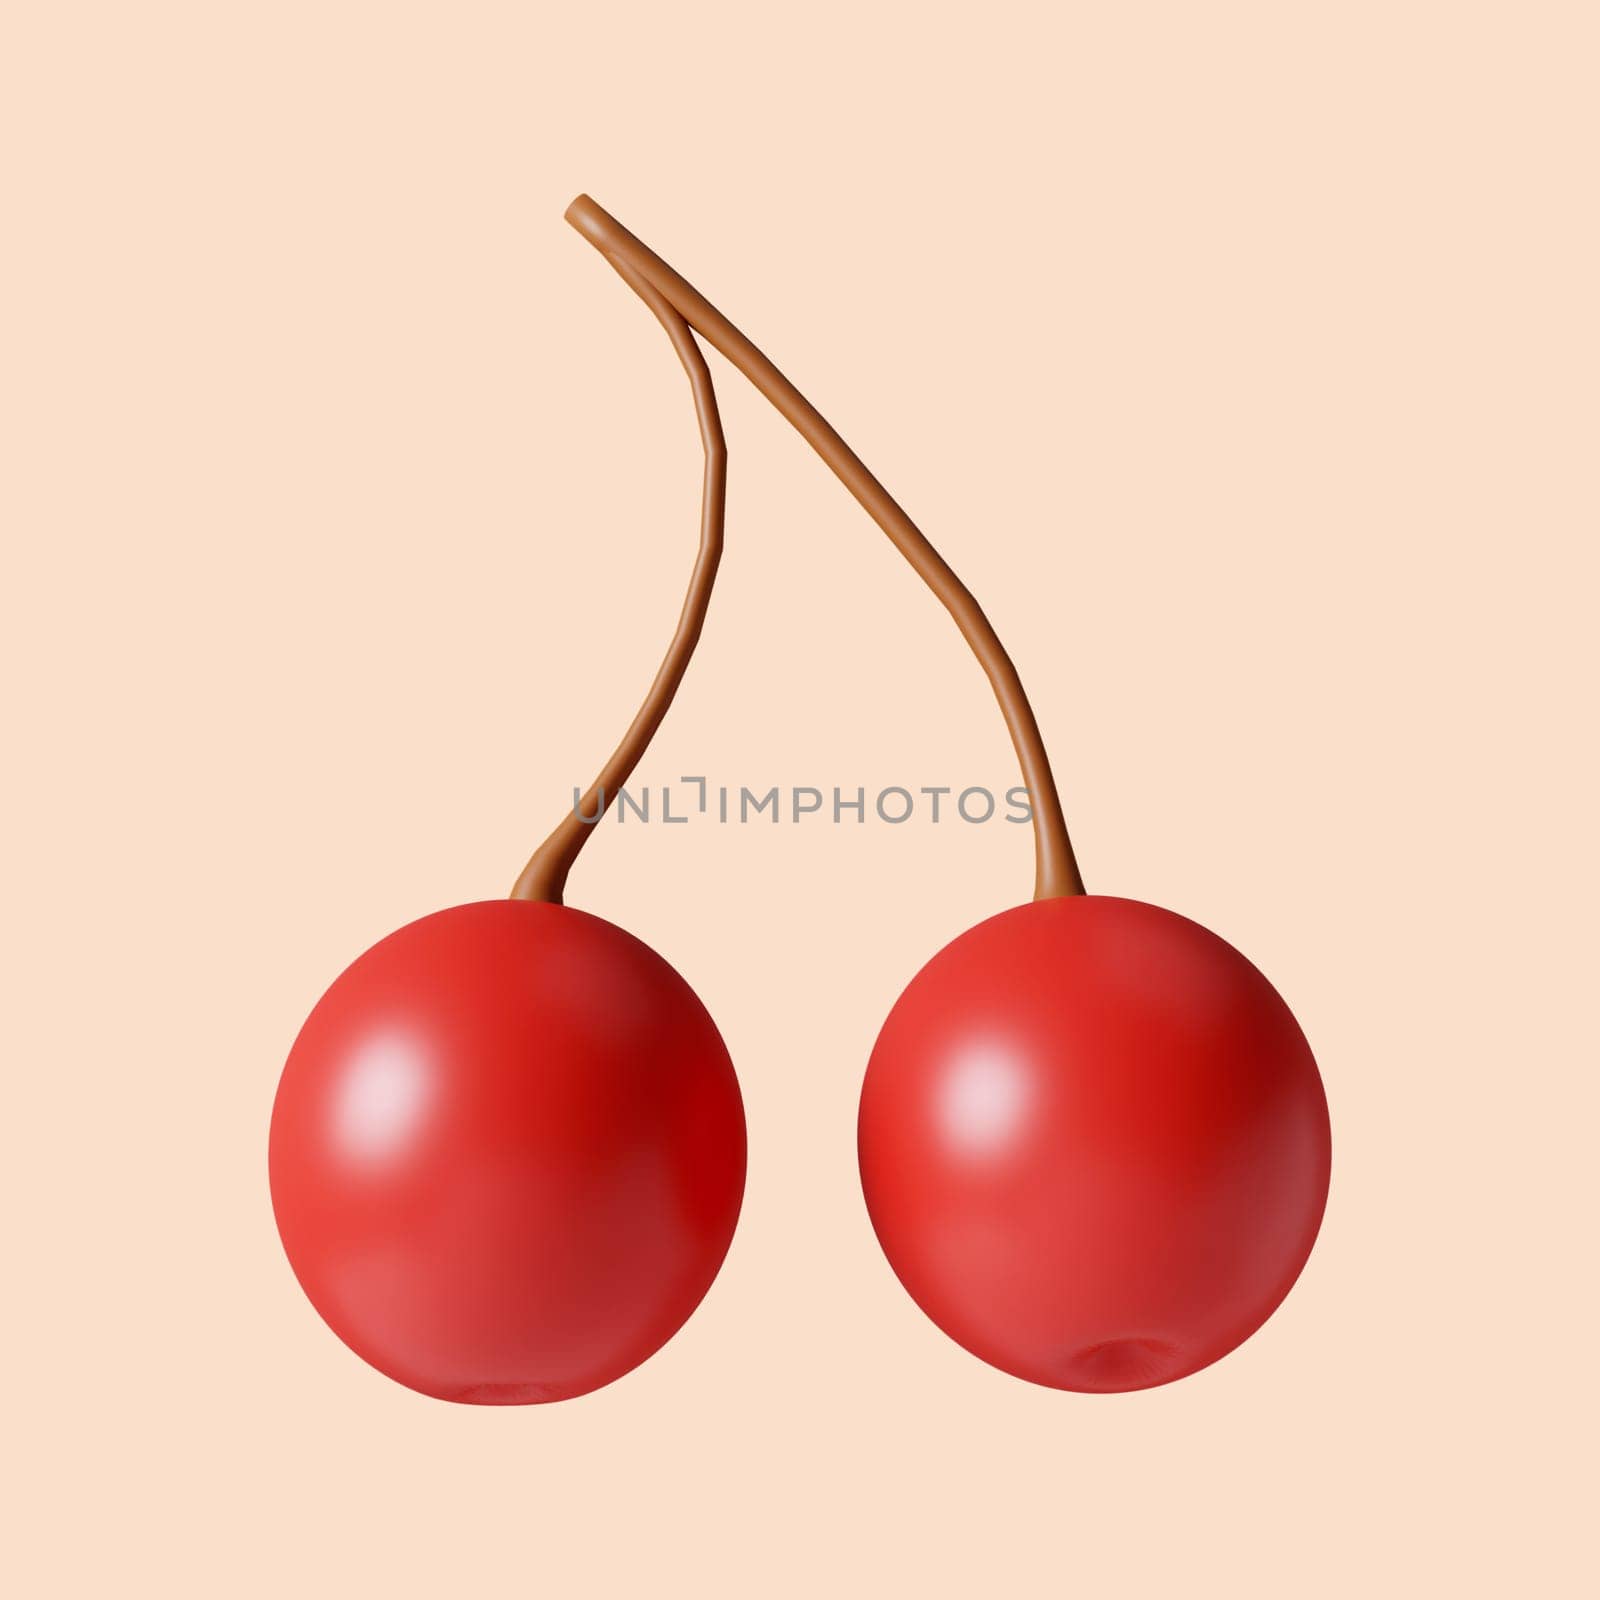 3d Autumn cherry. Golden fall. Season decoration. icon isolated on gray background. 3d rendering illustration. Clipping path. by meepiangraphic